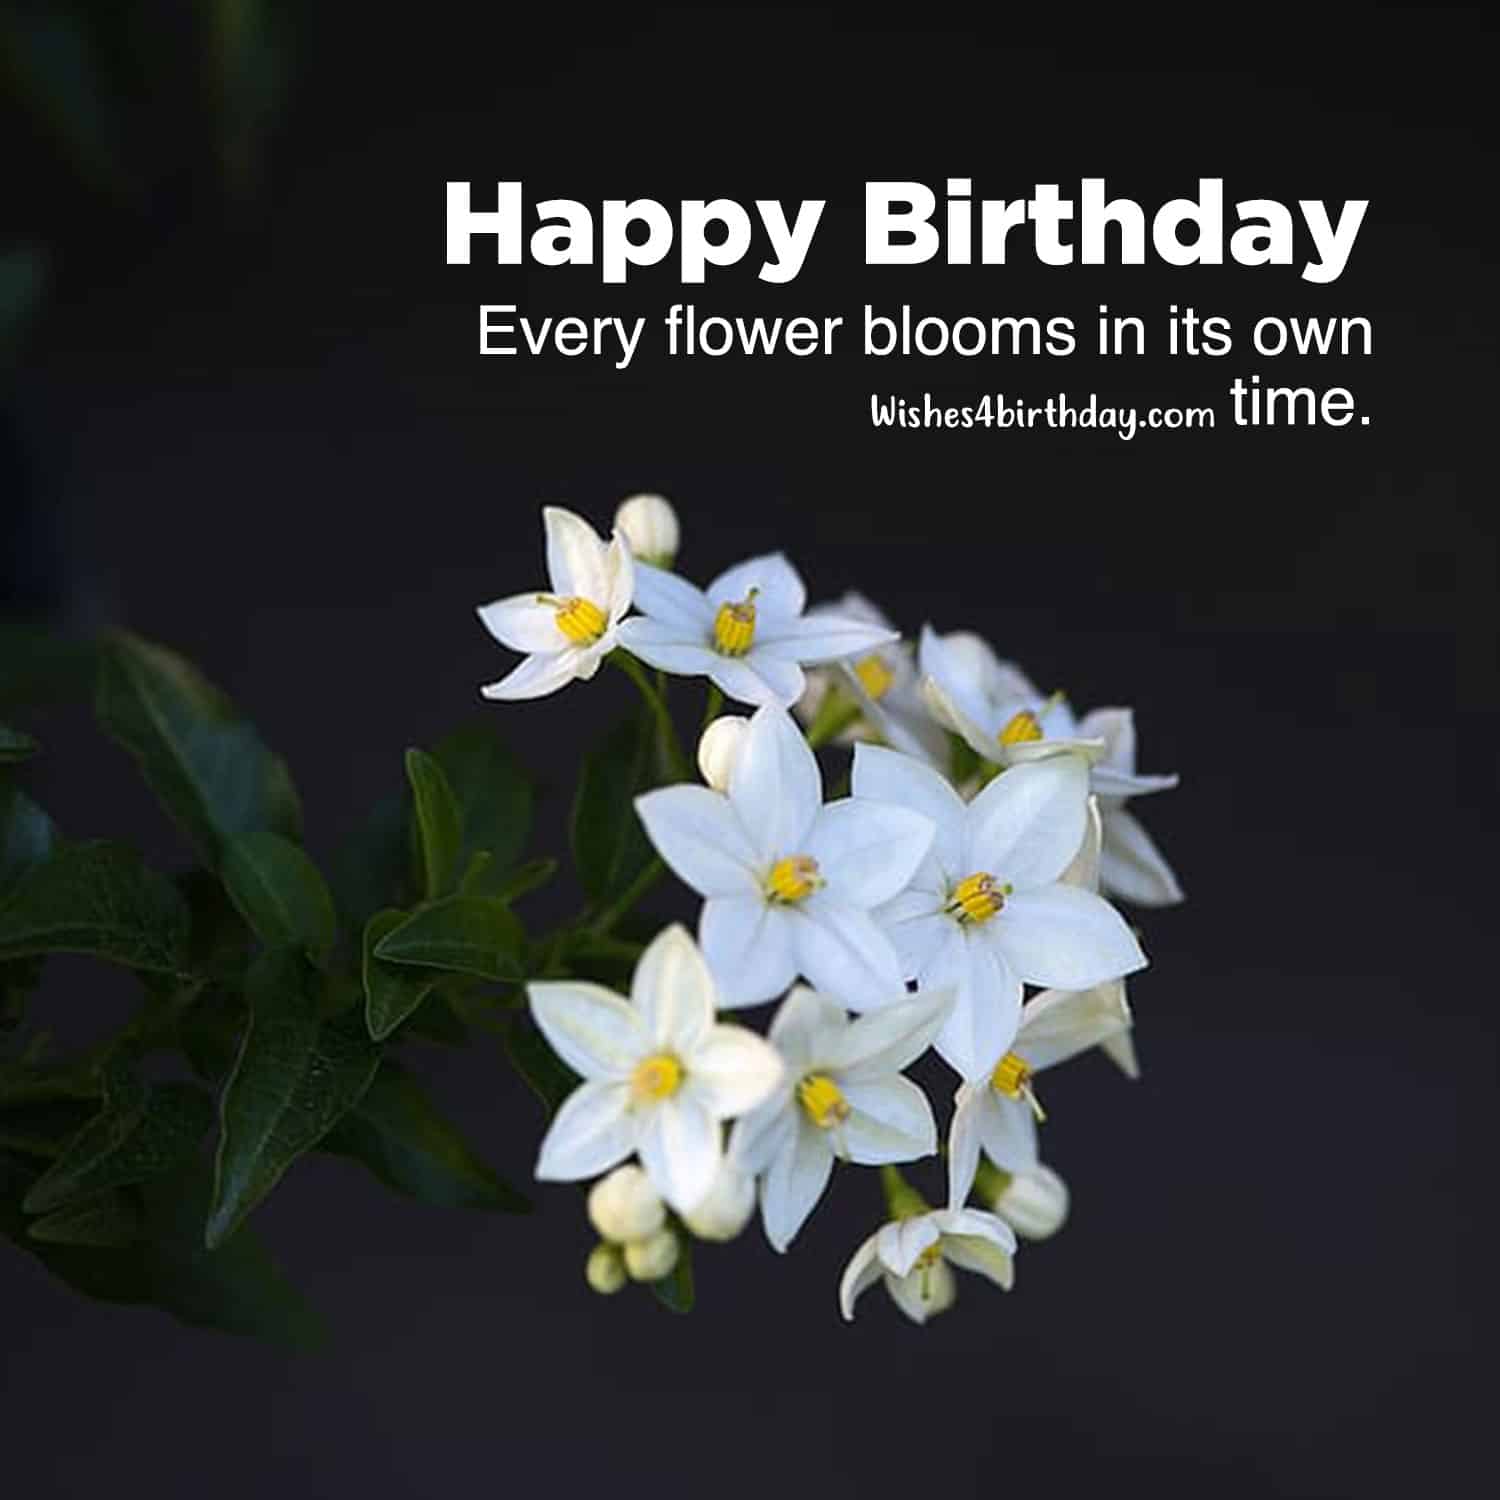 Collection of Birthday flower gifts for her